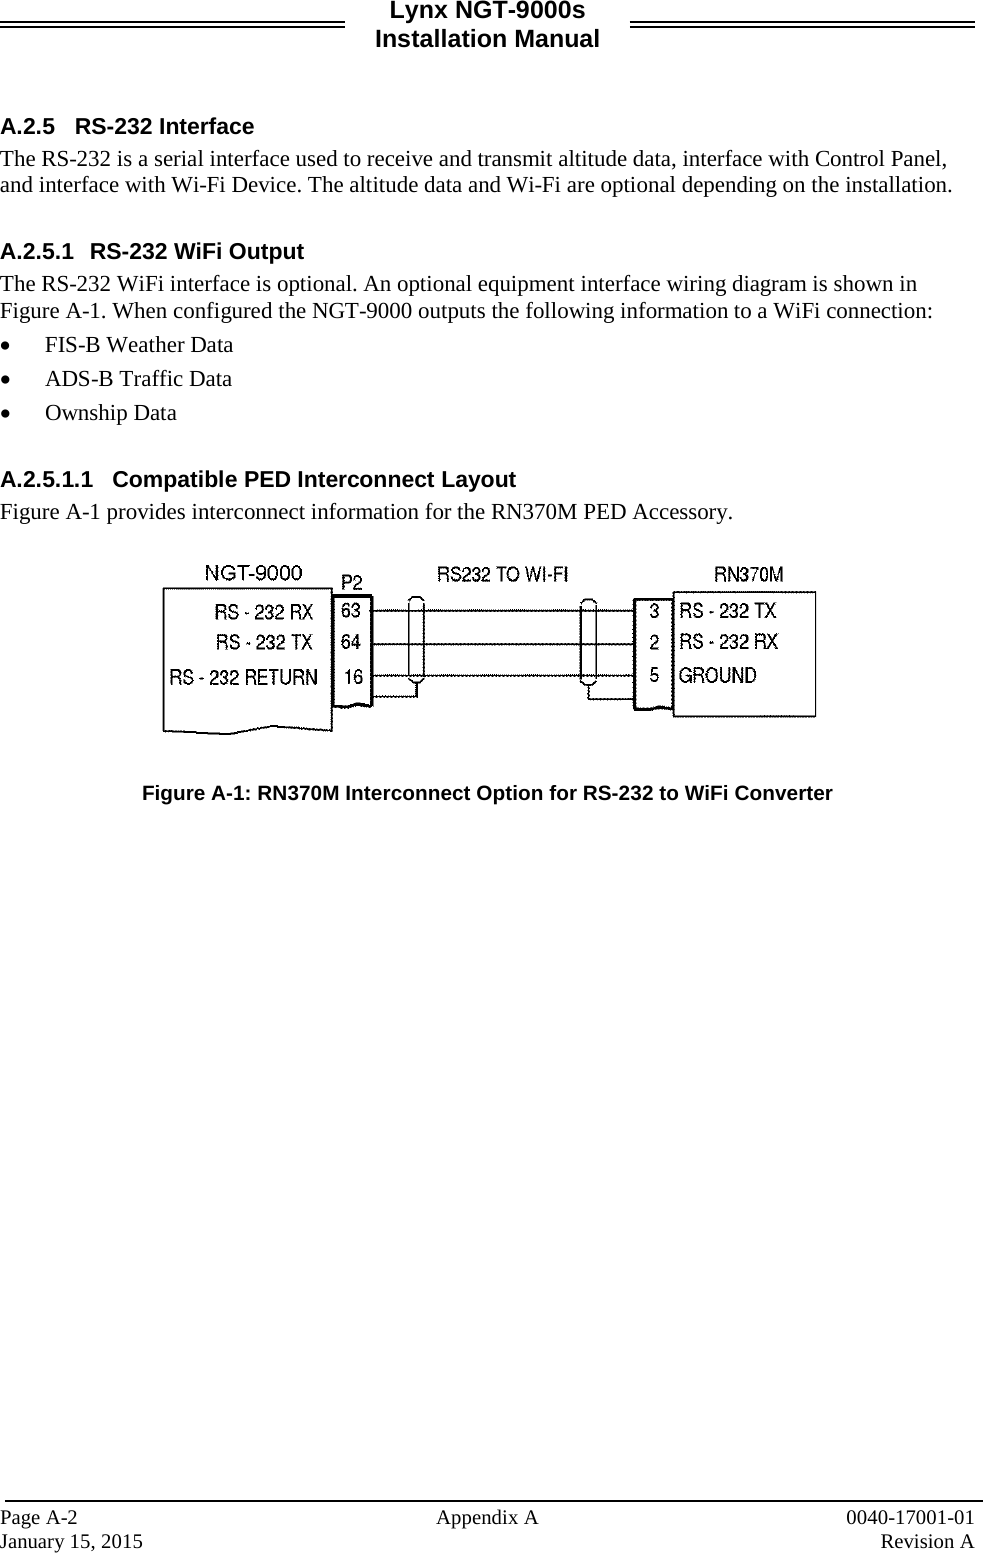 Lynx NGT-9000s Installation Manual   A.2.5 RS-232 Interface The RS-232 is a serial interface used to receive and transmit altitude data, interface with Control Panel, and interface with Wi-Fi Device. The altitude data and Wi-Fi are optional depending on the installation.  A.2.5.1 RS-232 WiFi Output  The RS-232 WiFi interface is optional. An optional equipment interface wiring diagram is shown in Figure A-1. When configured the NGT-9000 outputs the following information to a WiFi connection:  • FIS-B Weather Data • ADS-B Traffic Data • Ownship Data   A.2.5.1.1 Compatible PED Interconnect Layout Figure A-1 provides interconnect information for the RN370M PED Accessory.     Figure A-1: RN370M Interconnect Option for RS-232 to WiFi Converter      Page A-2  Appendix A 0040-17001-01 January 15, 2015 Revision A 